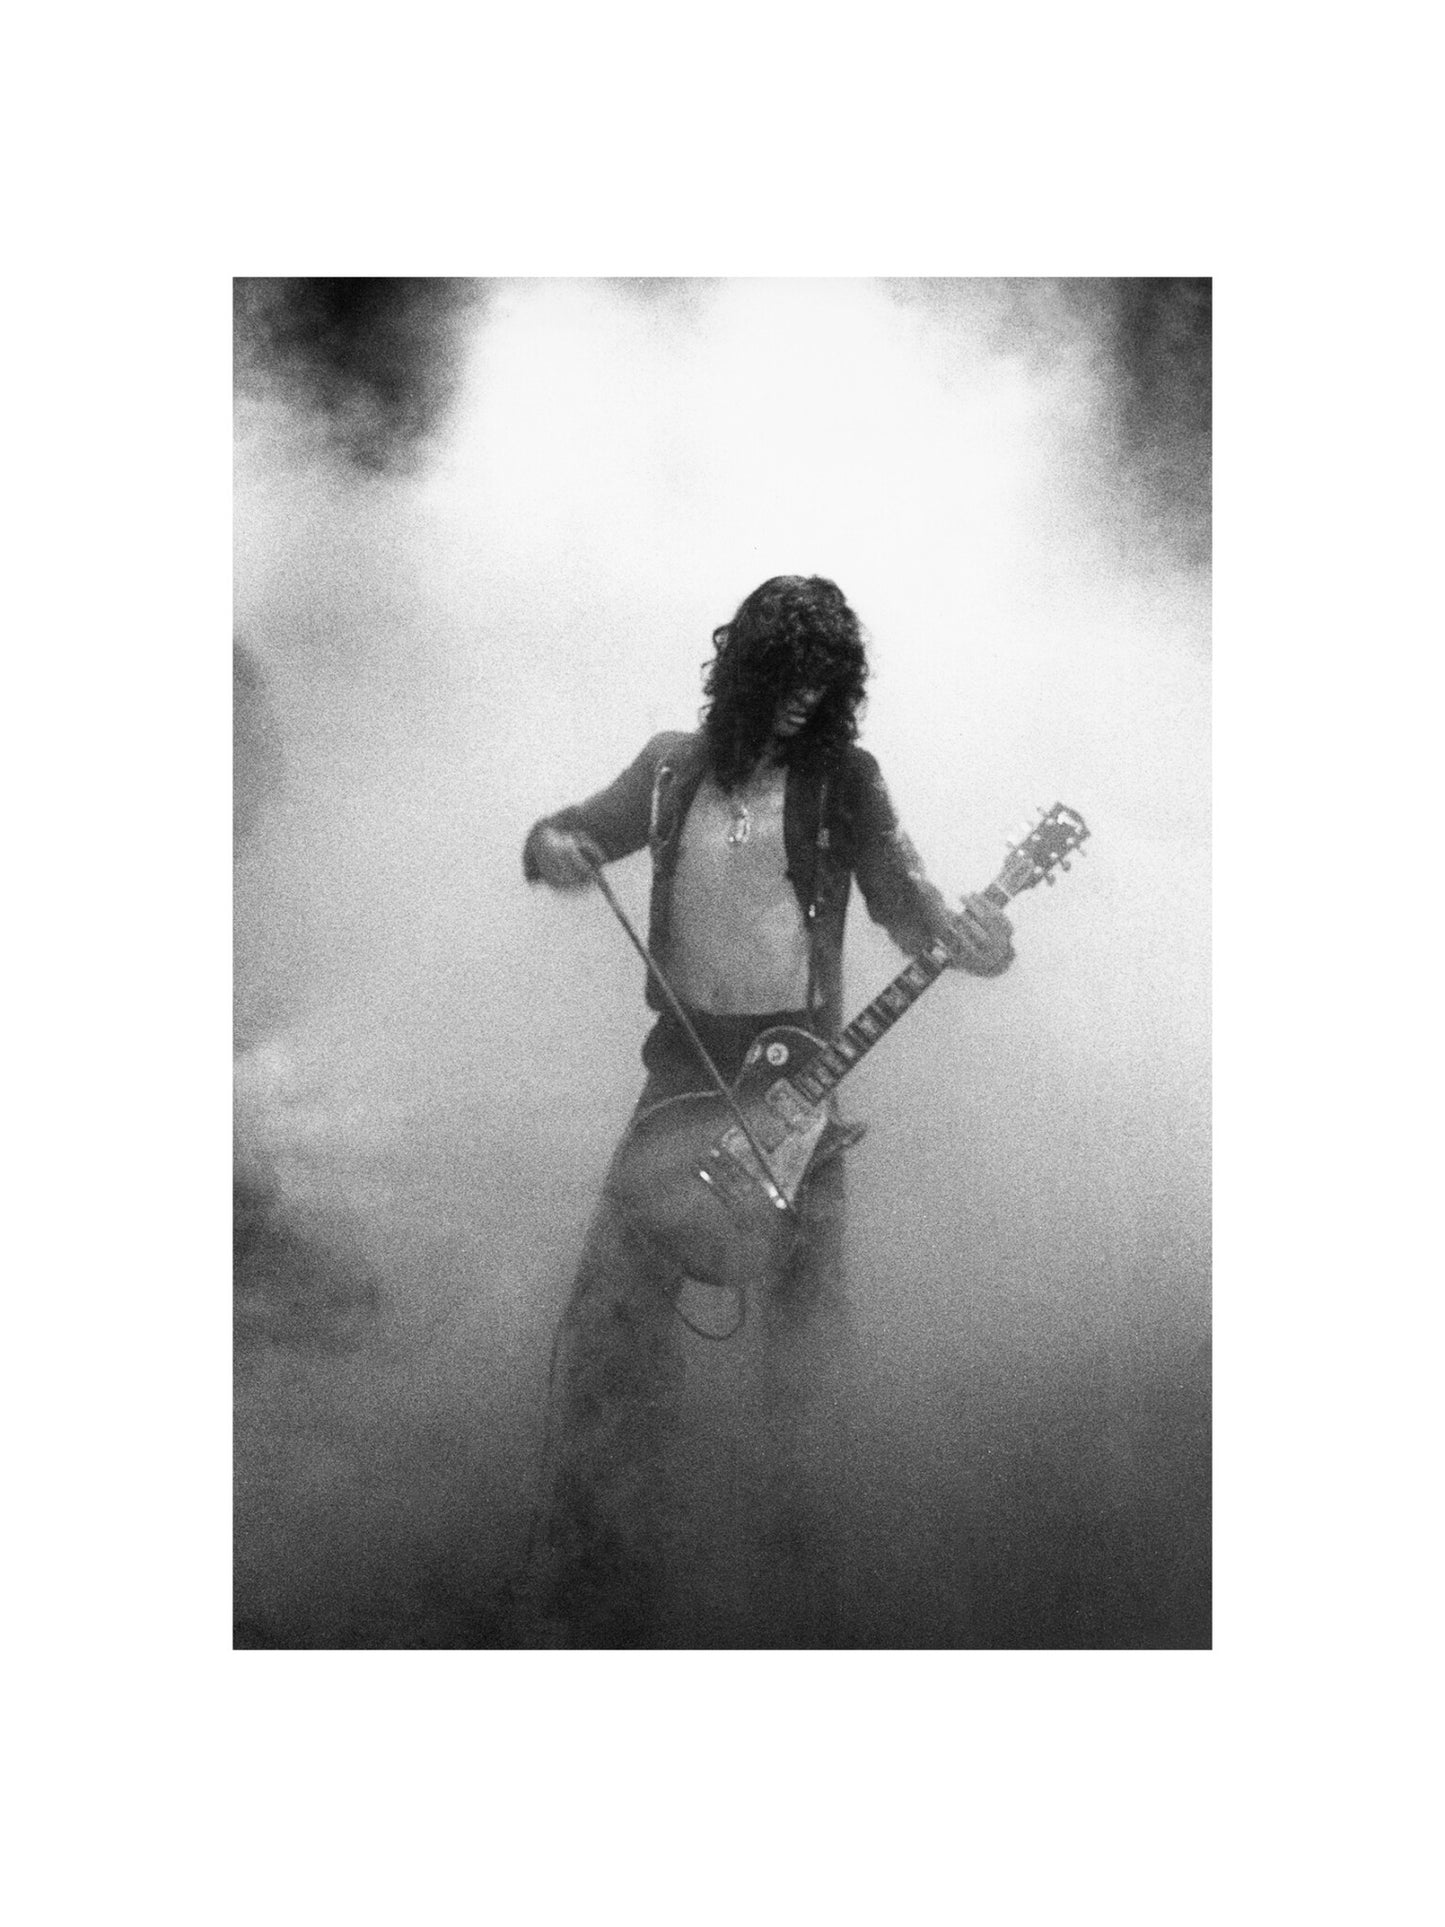 Led Zeppelin - Jimmy Page Playing Guitar with a Bow, England, 1975 Print